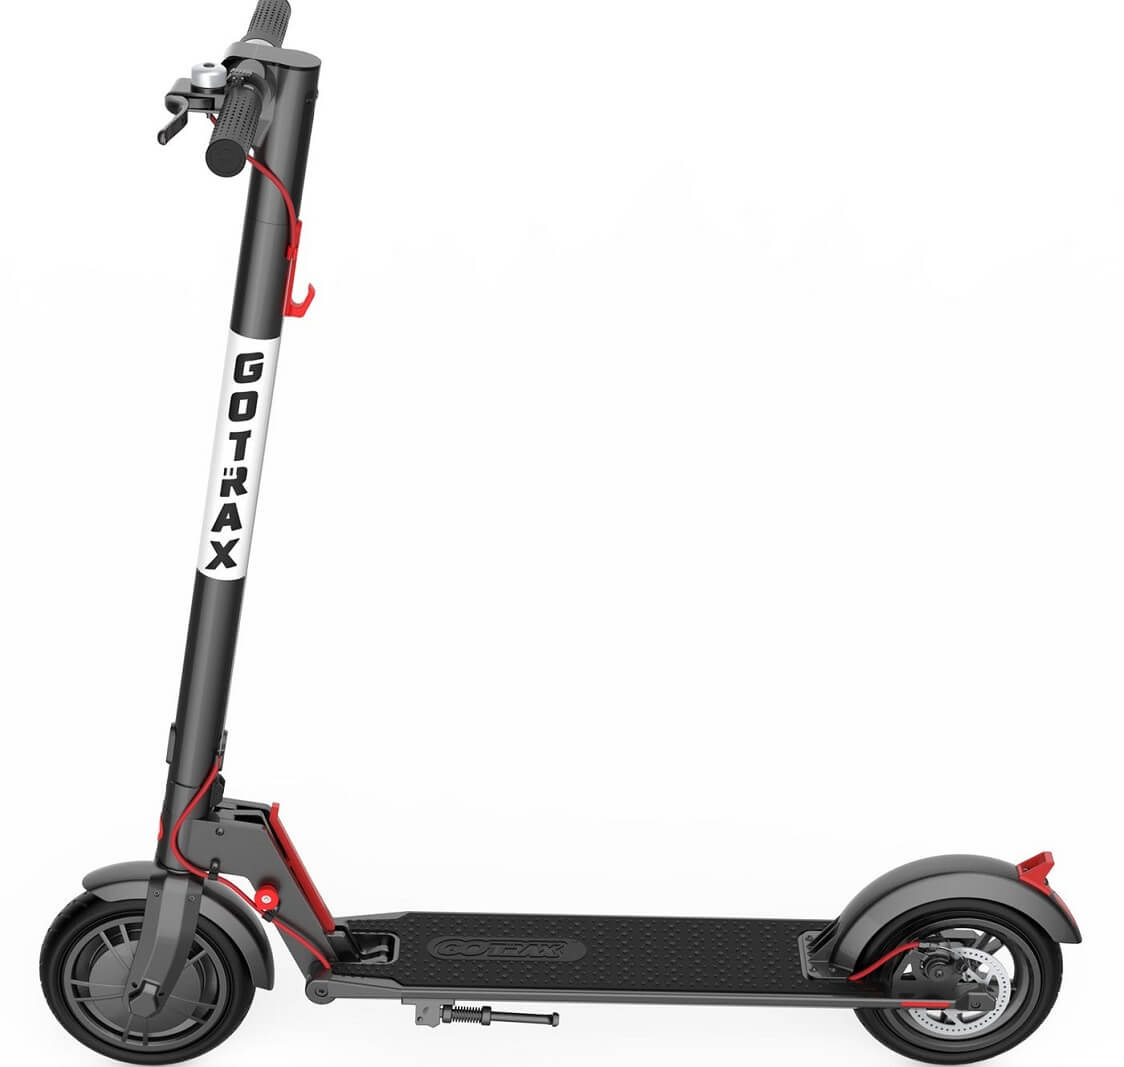 Gotrax GXL V2 — Best cheap electric scooter for adults